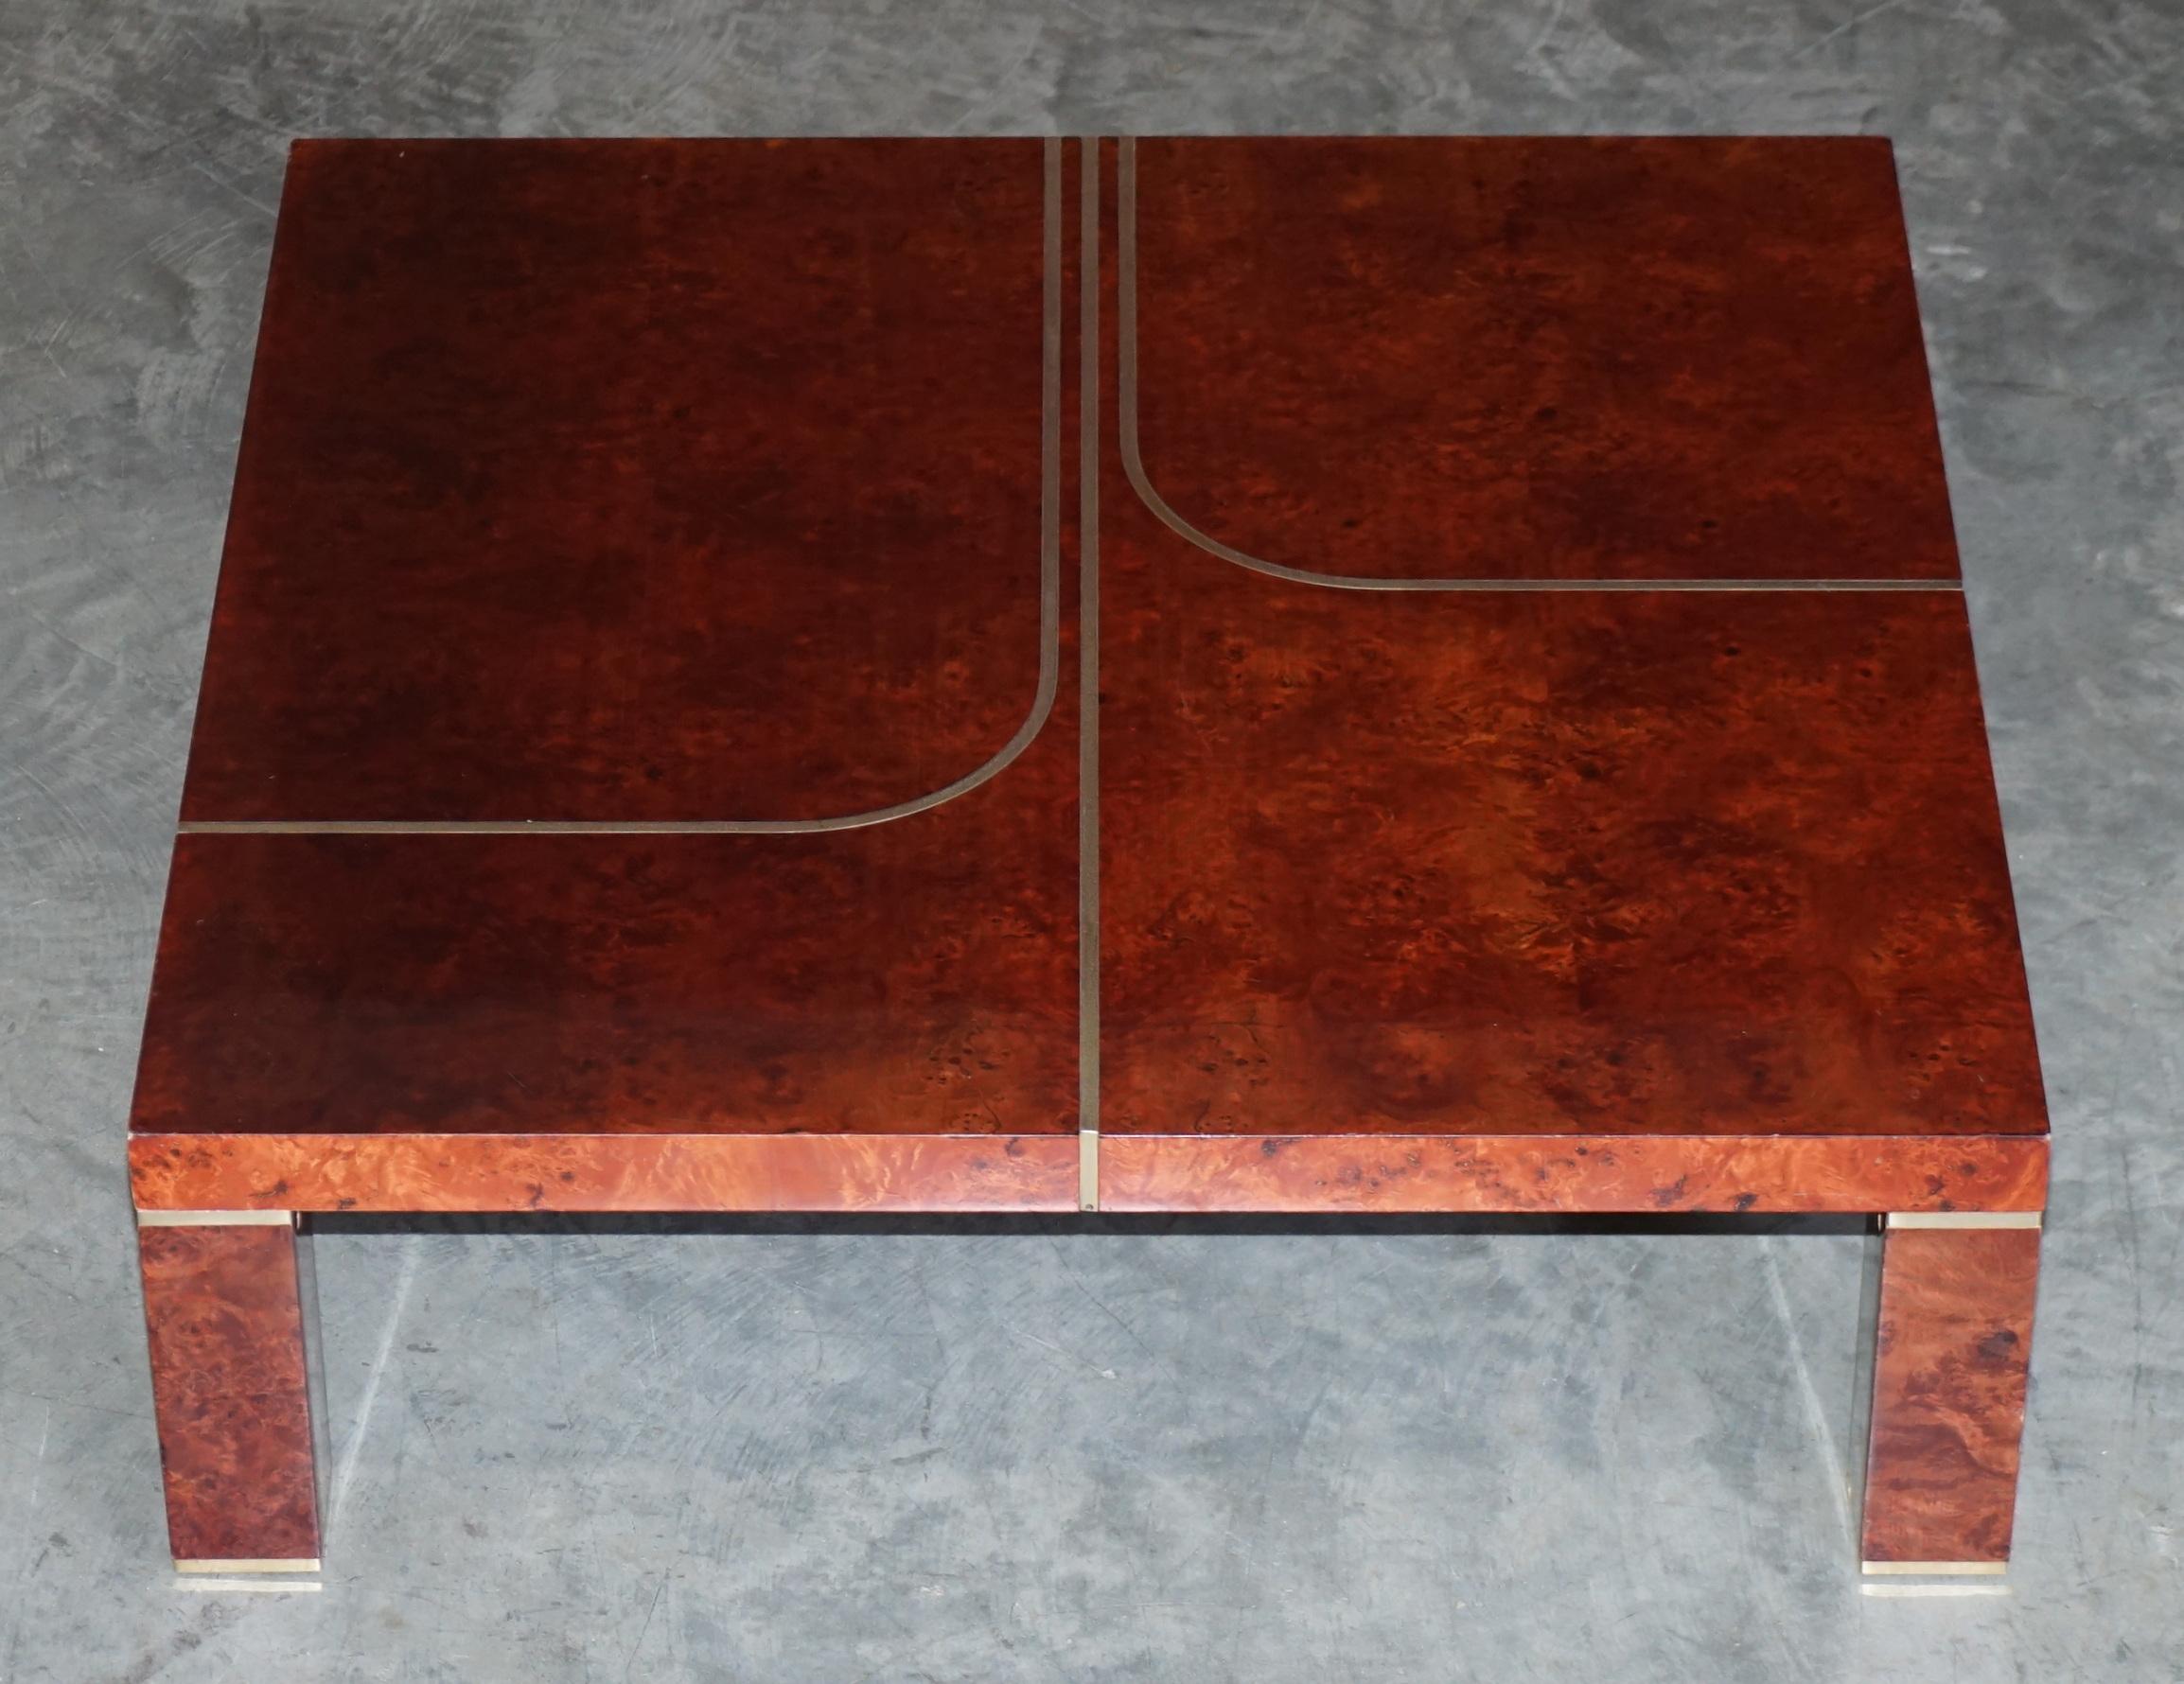 Royal House Antiques

Royal House Antiques is delighted to offer for sale this Contemporary Art Modern Burr Walnut & Brass inlaid coffee table

Please note the delivery fee listed is just a guide, it covers within the M25 only for the UK and